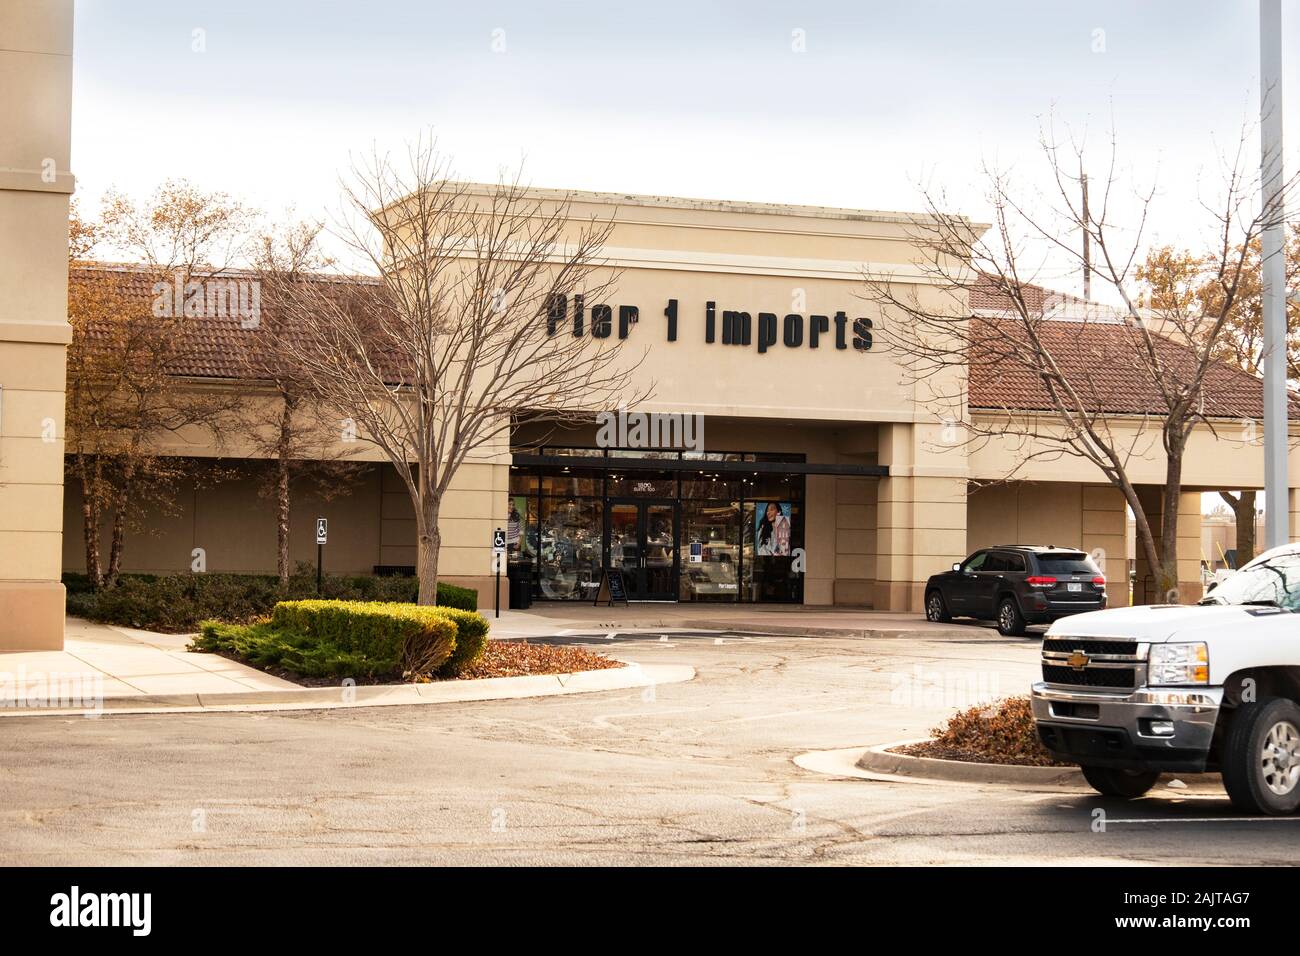 Pier 1 Imports, a store selling goods from around the world in Bradley Fair shopping center in Wichita, Kansas, USA Stock Photo